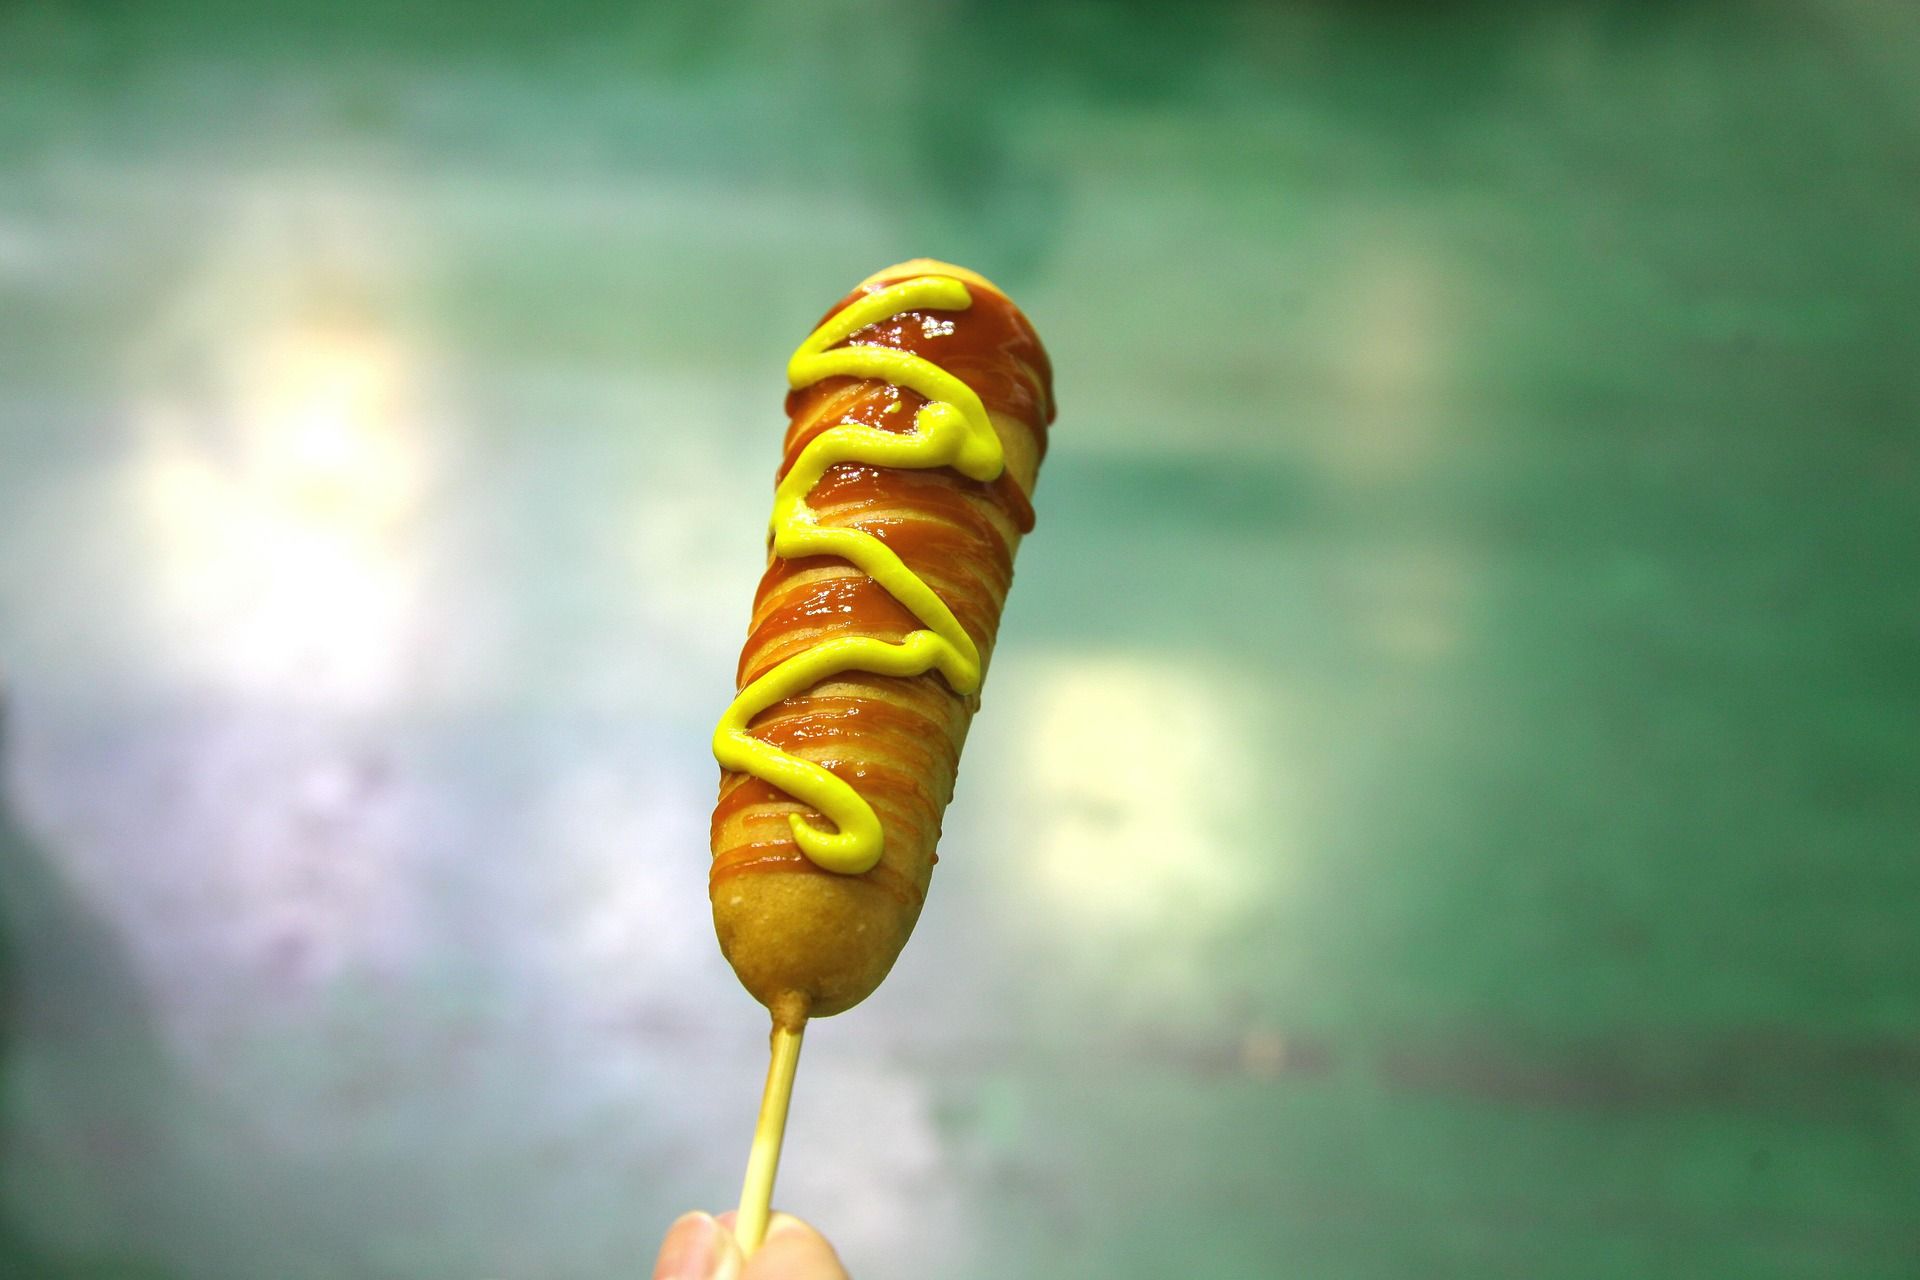 Corn dog on a stick with ketchup and mustard